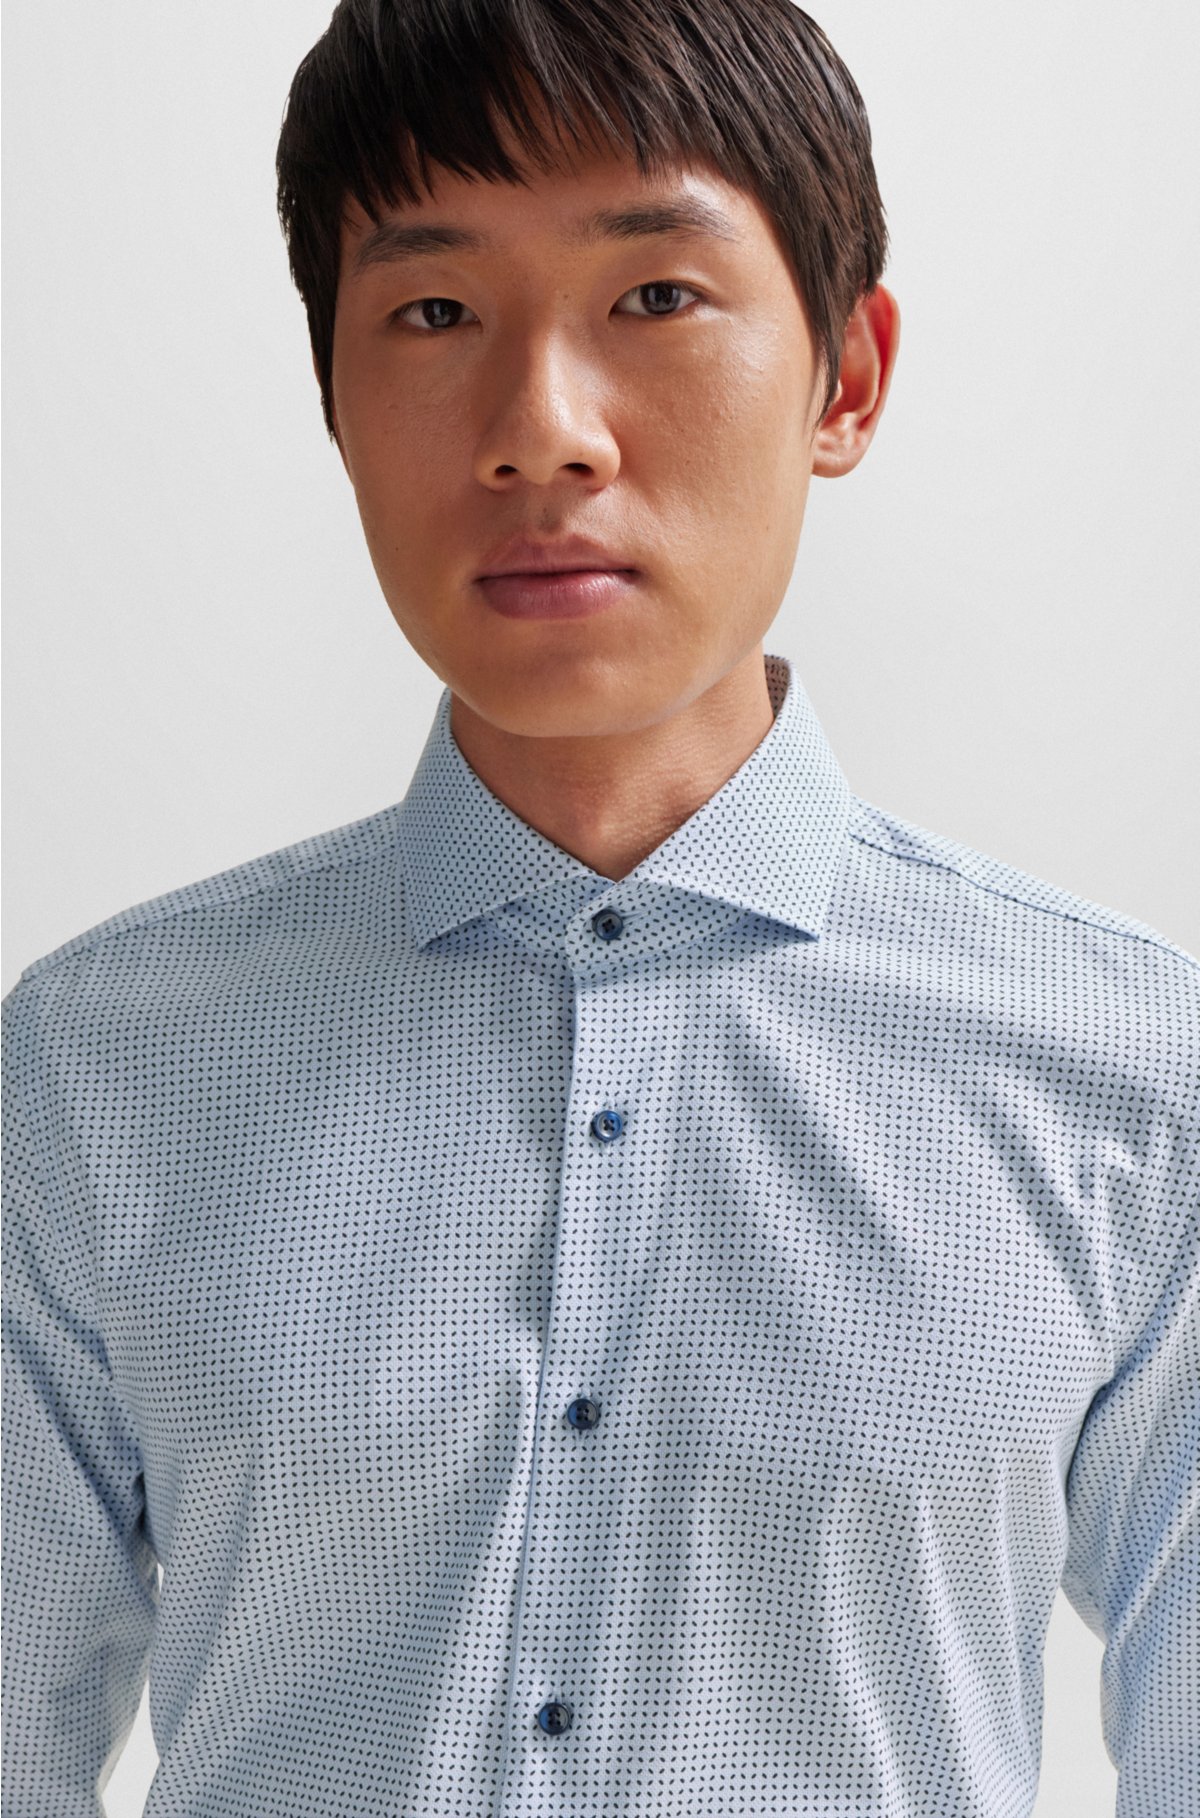 Slim-fit shirt in printed Oxford stretch cotton, Light Blue